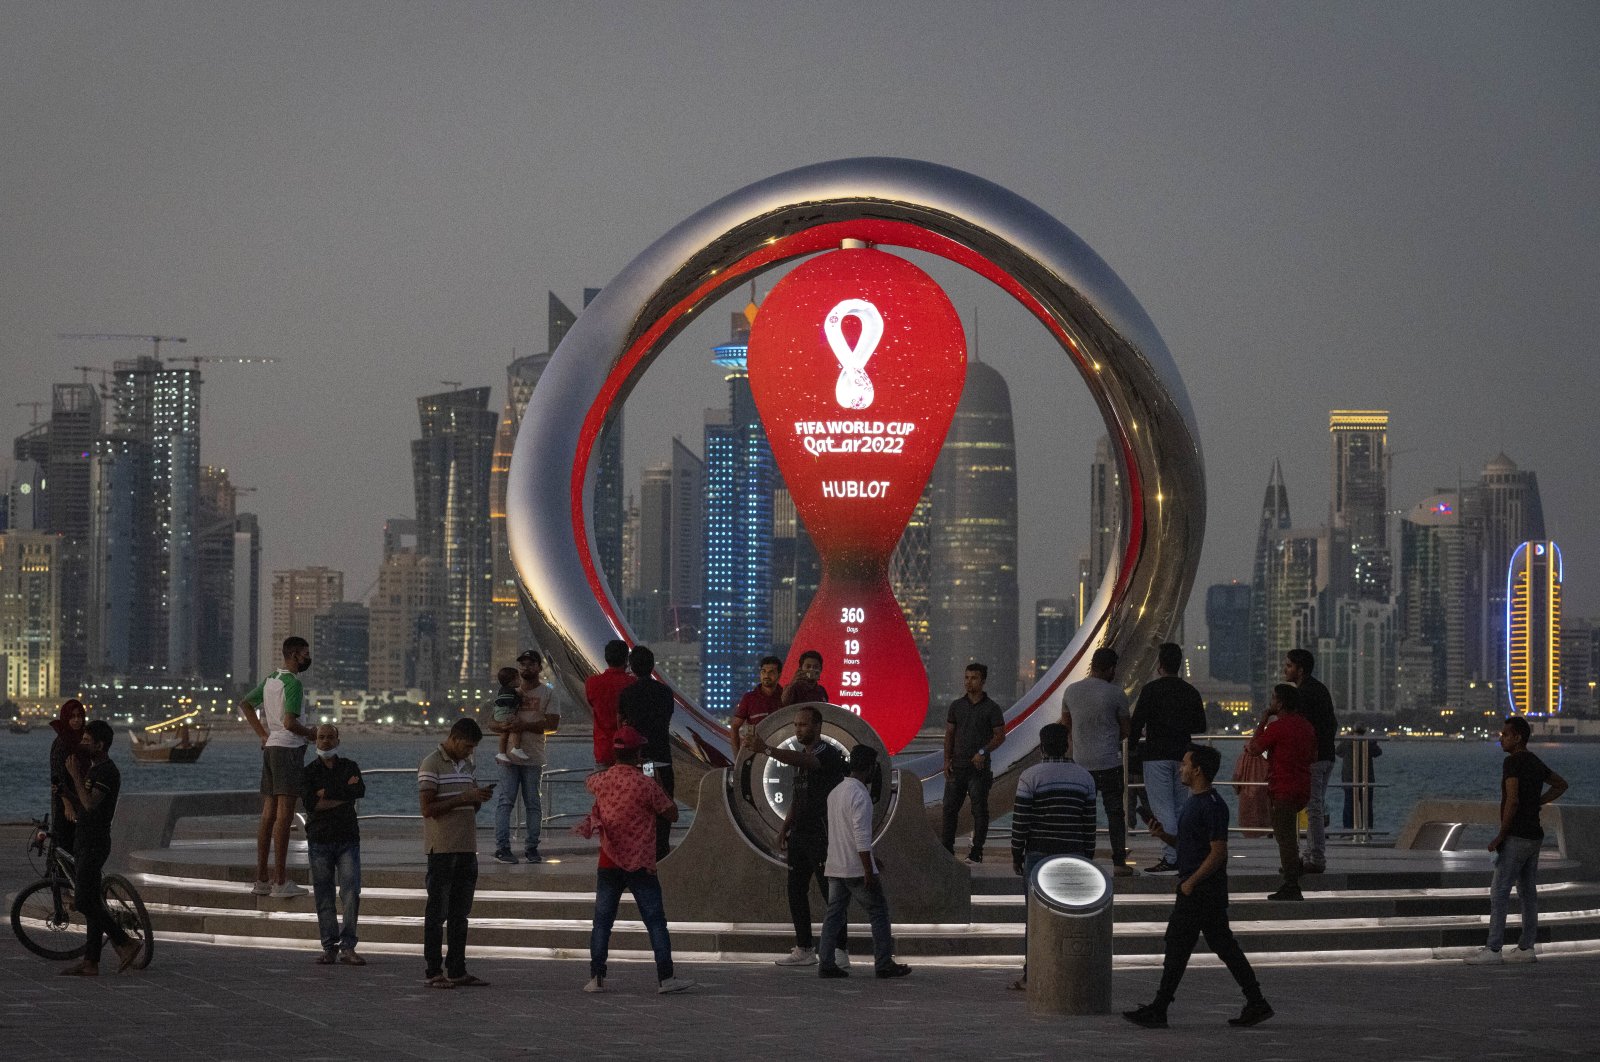 People gather around the official countdown clock showing the remaining time until the kickoff of the World Cup 2022, in Doha, Qatar, Nov. 25, 2021. (AP Photo)